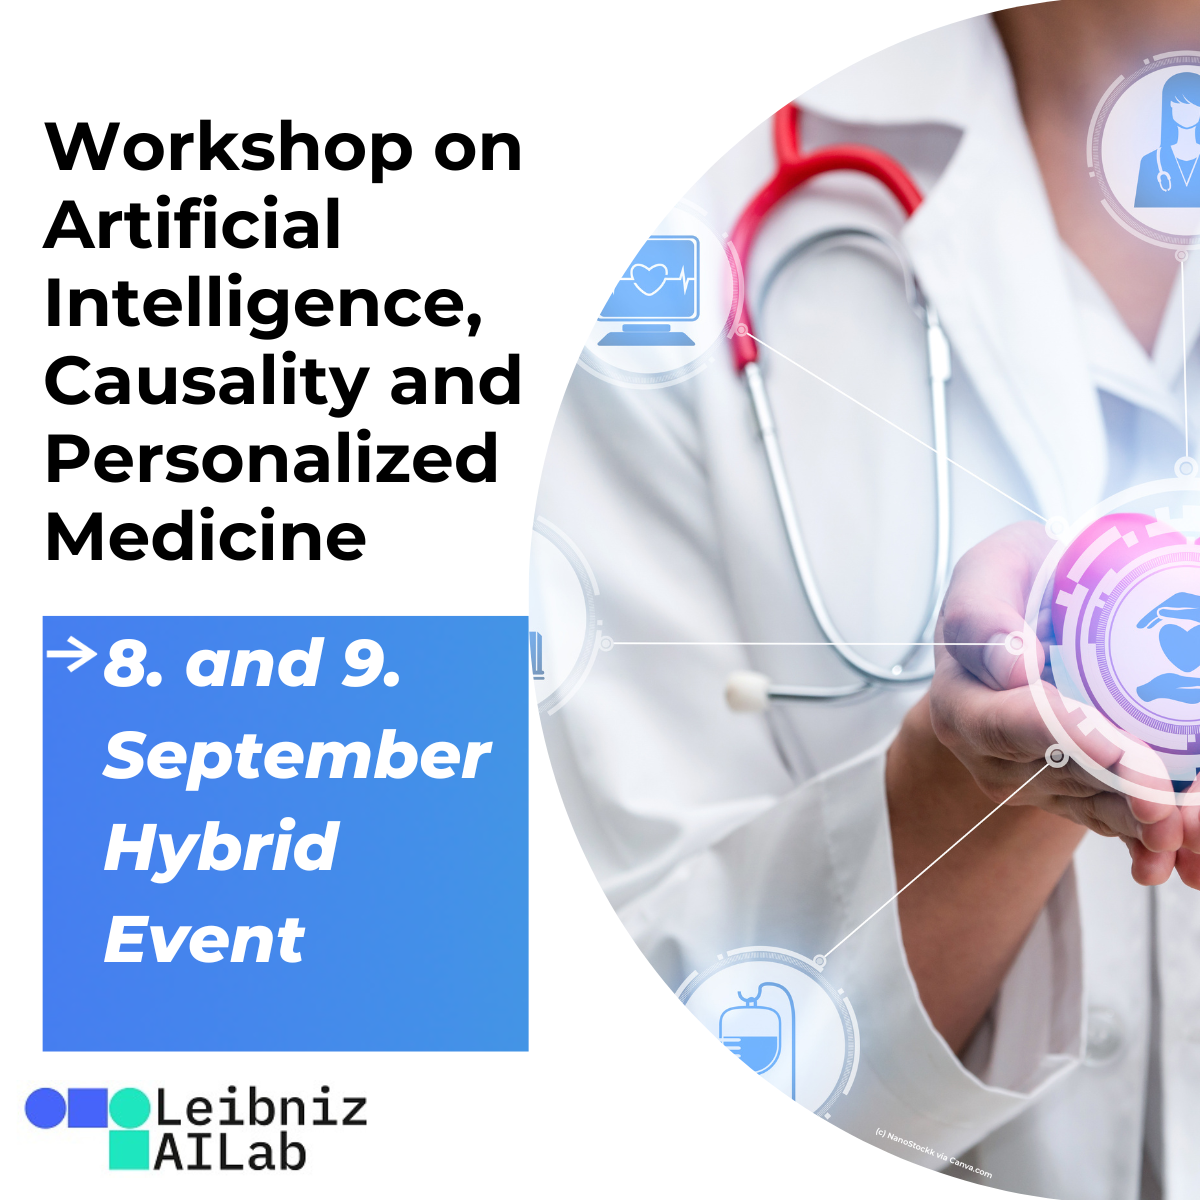 Workshop on AI, Causality, and Personalized Medicine